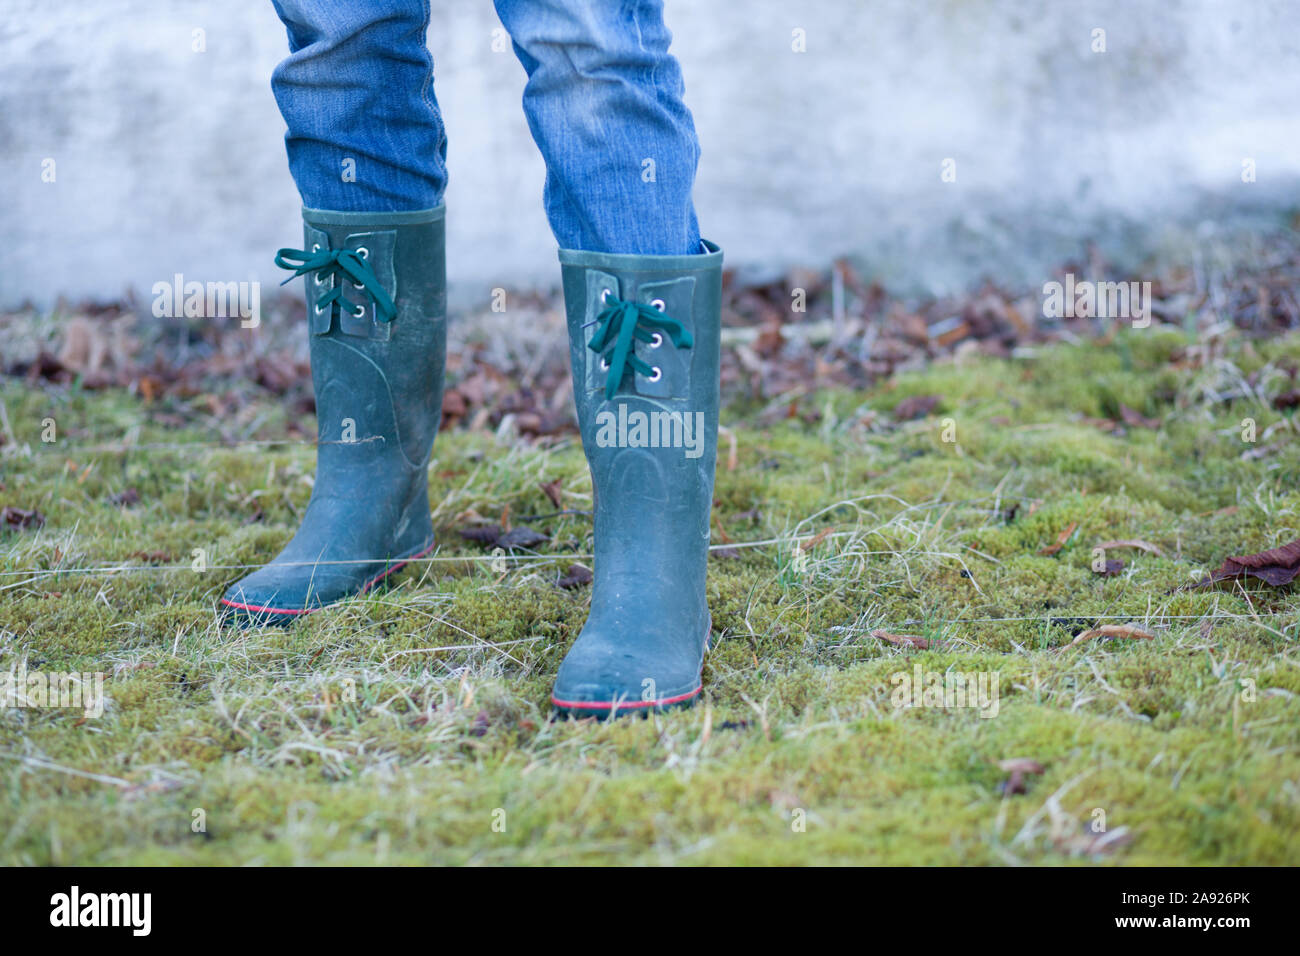 Person wearing wellington boots Stock Photo